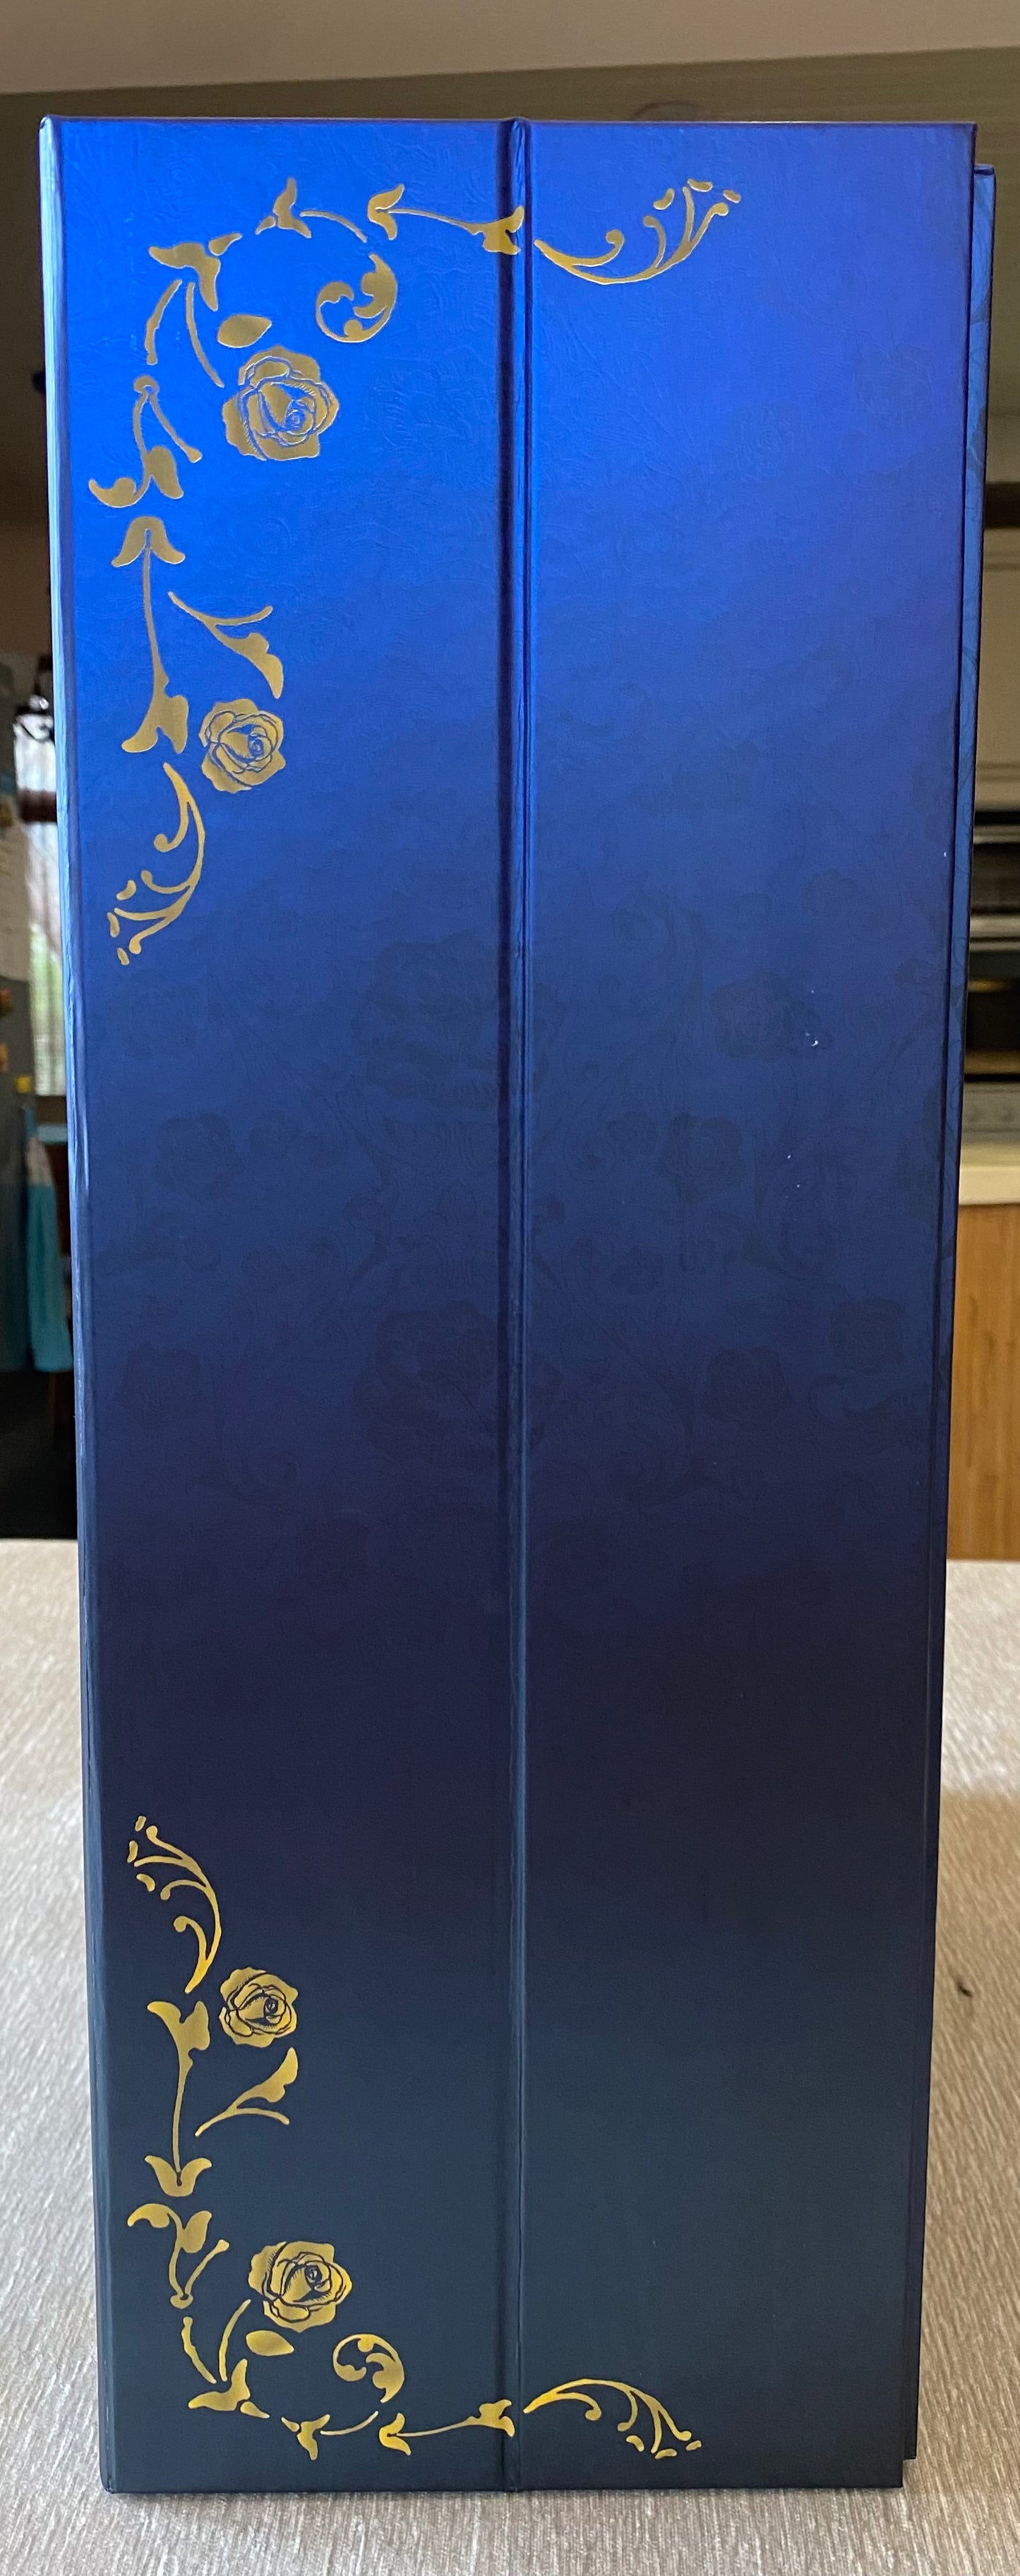 Disney Belle Beauty And The Beast Platinum 30th Anniversary Doll Giftset